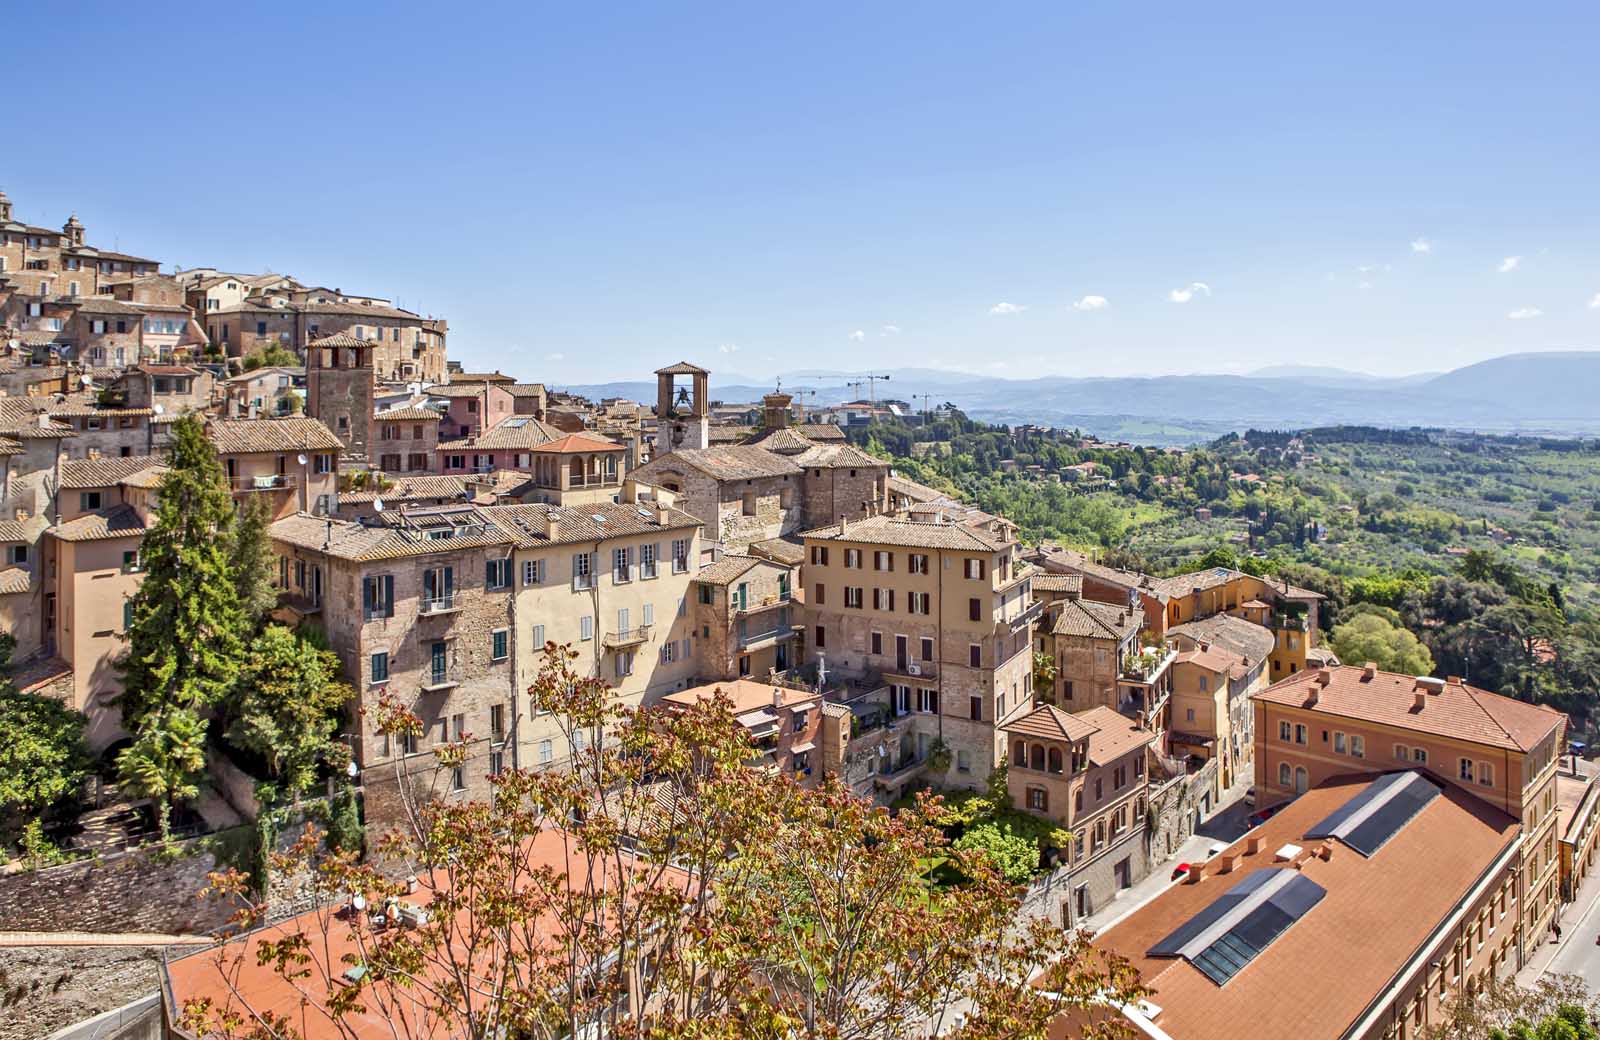 Best Day Trips From Florence Etruscan Academy Museum in Cortona